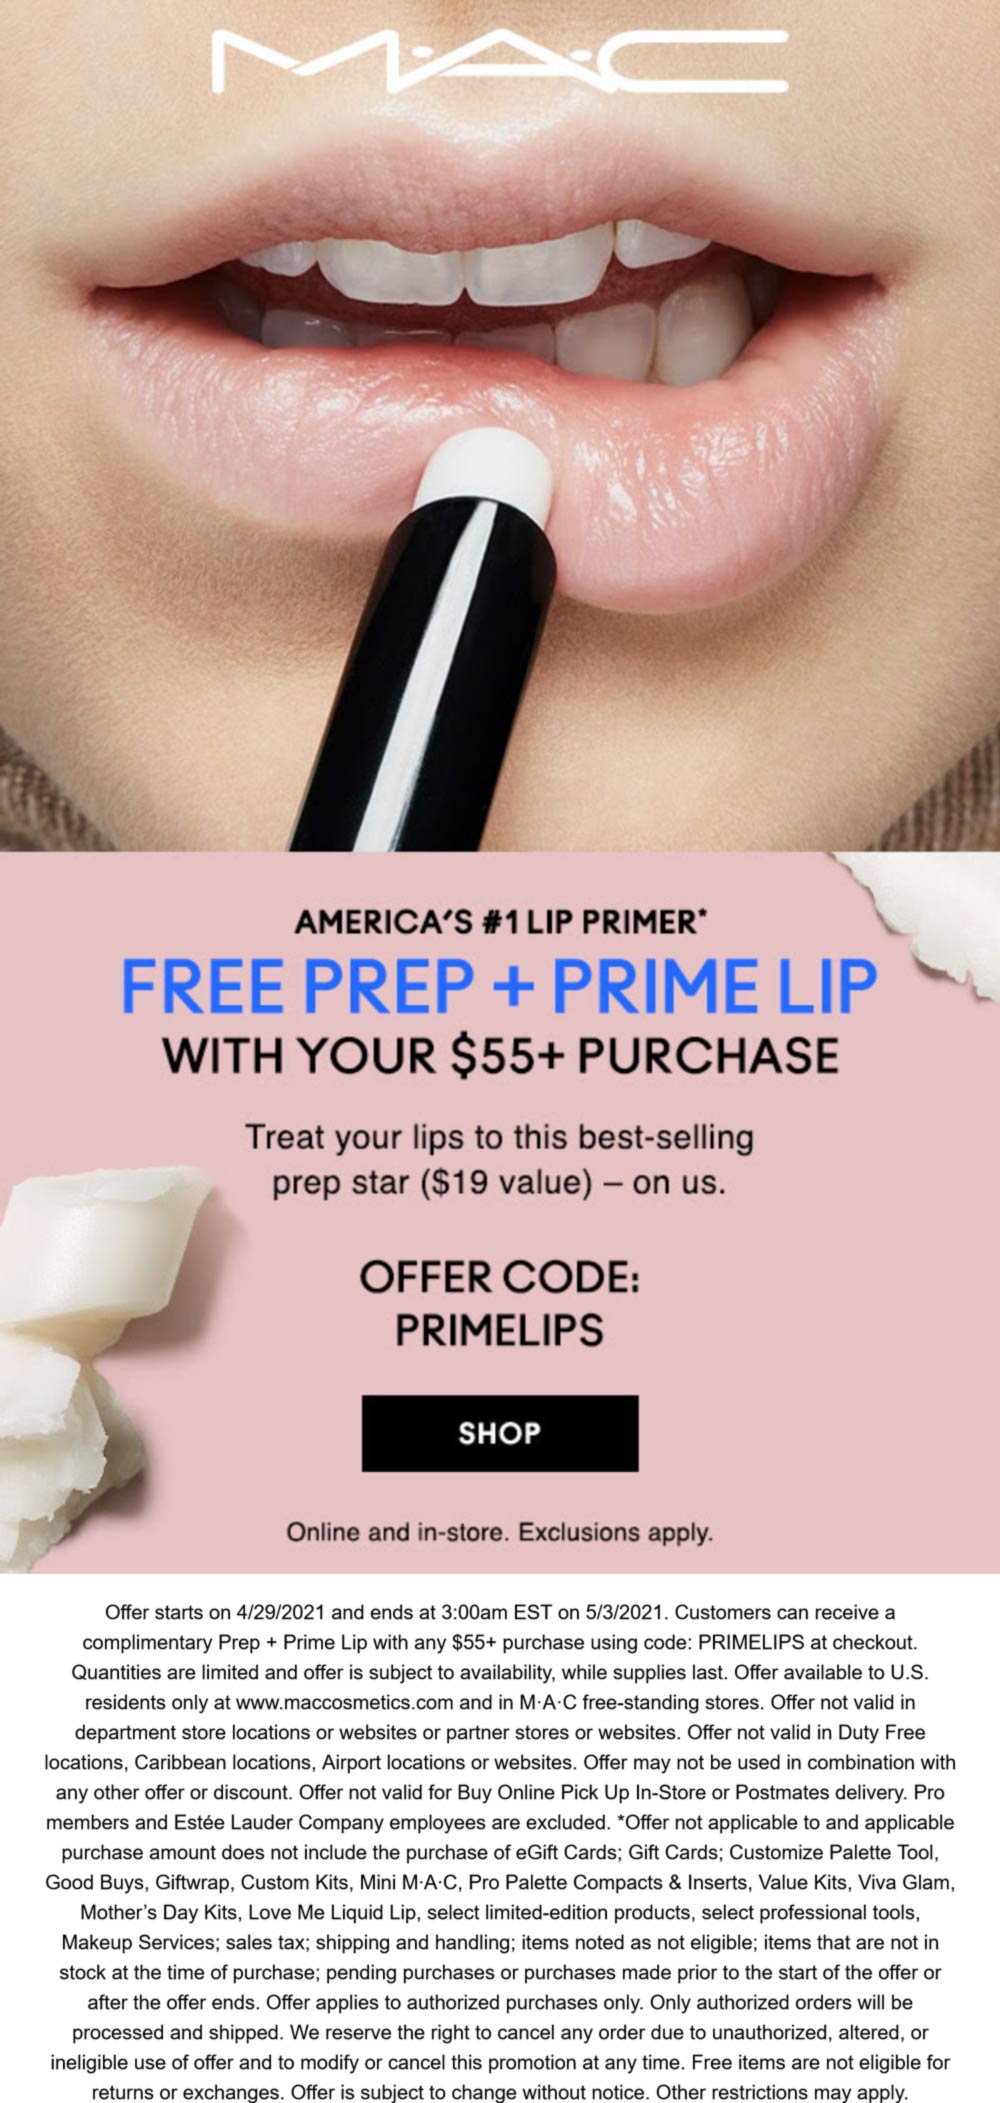 MAC stores Coupon  Free $19 prep + prime lip with $55 spent today at MAC cosmetics, or online via promo code PRIMELIPS #mac 